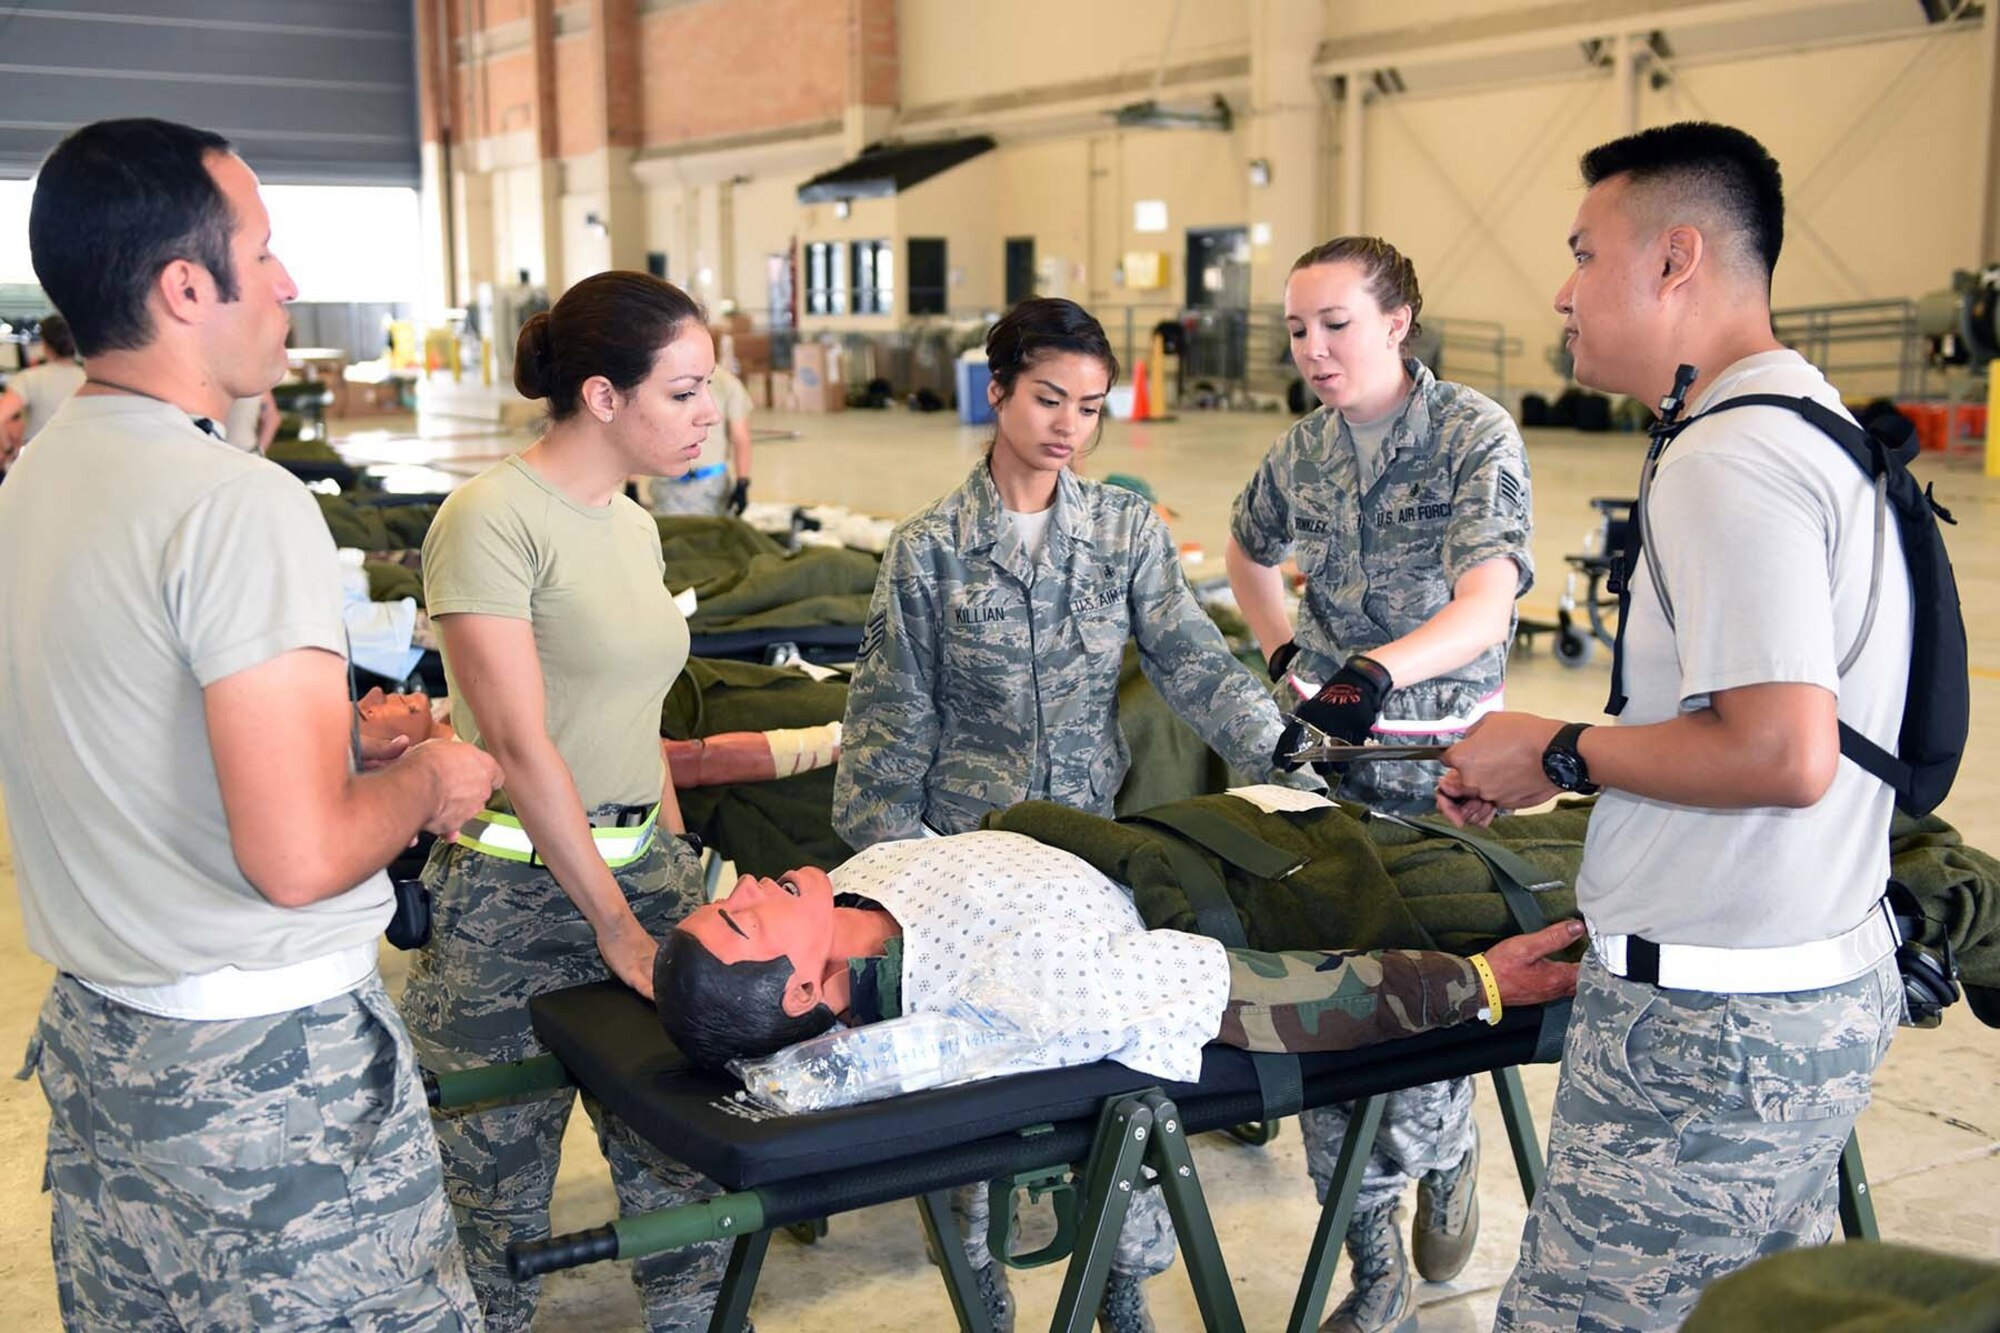 Airmen from the 59th Medical Wing, Joint Base San Antonio-Lackland, Texas, discuss a simulated patient's care during aeromedical evacuation processing in an Ultimate Caduceus 2015 exercise at Naval Air Station Joint Reserve Base New Orleans, La., April 16, 2015. Ultimate Caduceus 2015 consists of approximately 140 military personnel representing active duty, National Guard and Reserve forces from California, Delaware, Illinois, Kansas, Louisiana, Maryland, Mississippi, Texas and Washington, D.C. (U.S. Air National Guard Photo by Master Sgt. Dan Farrell, 159th Fighter Wing Public Affairs Office/Released)